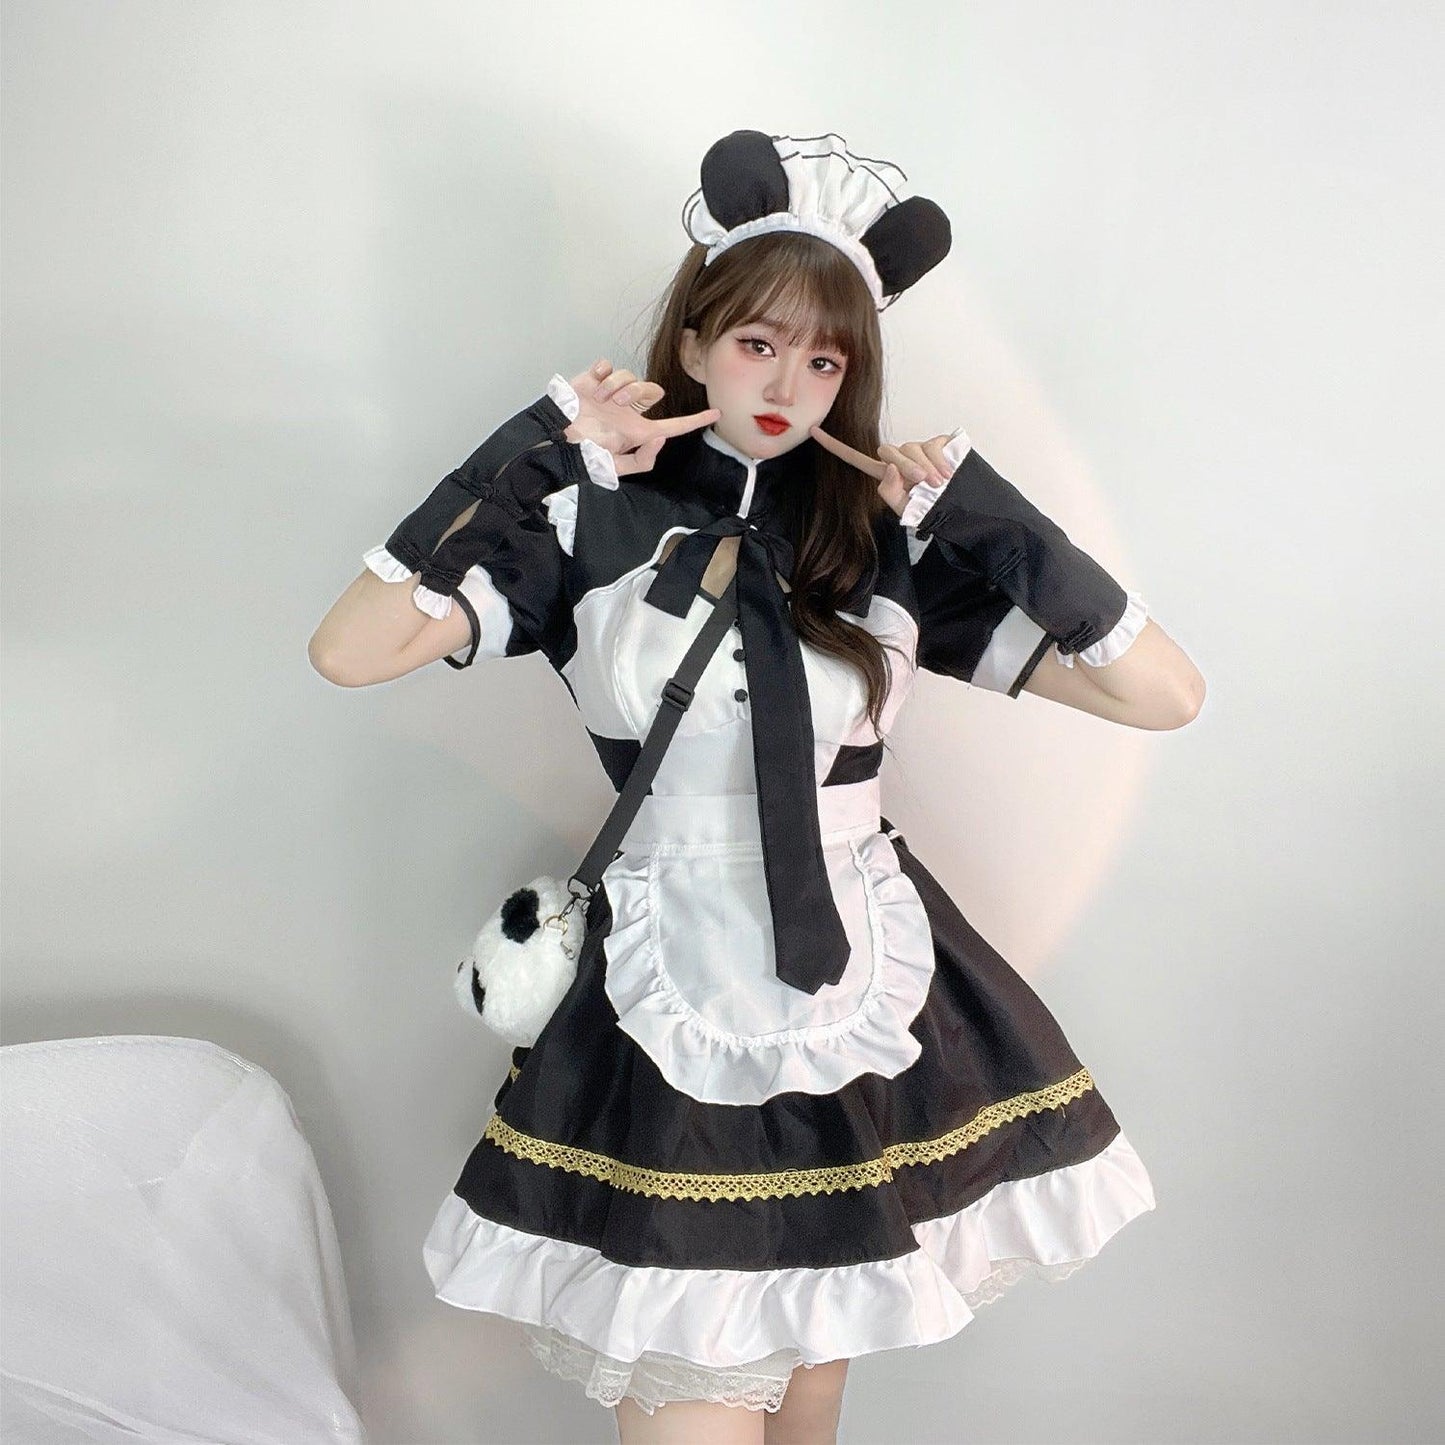 Black and White Panda Girl Anime Maid Outfit Lolita Dress Cute Fancy Dress Cosplay Costume